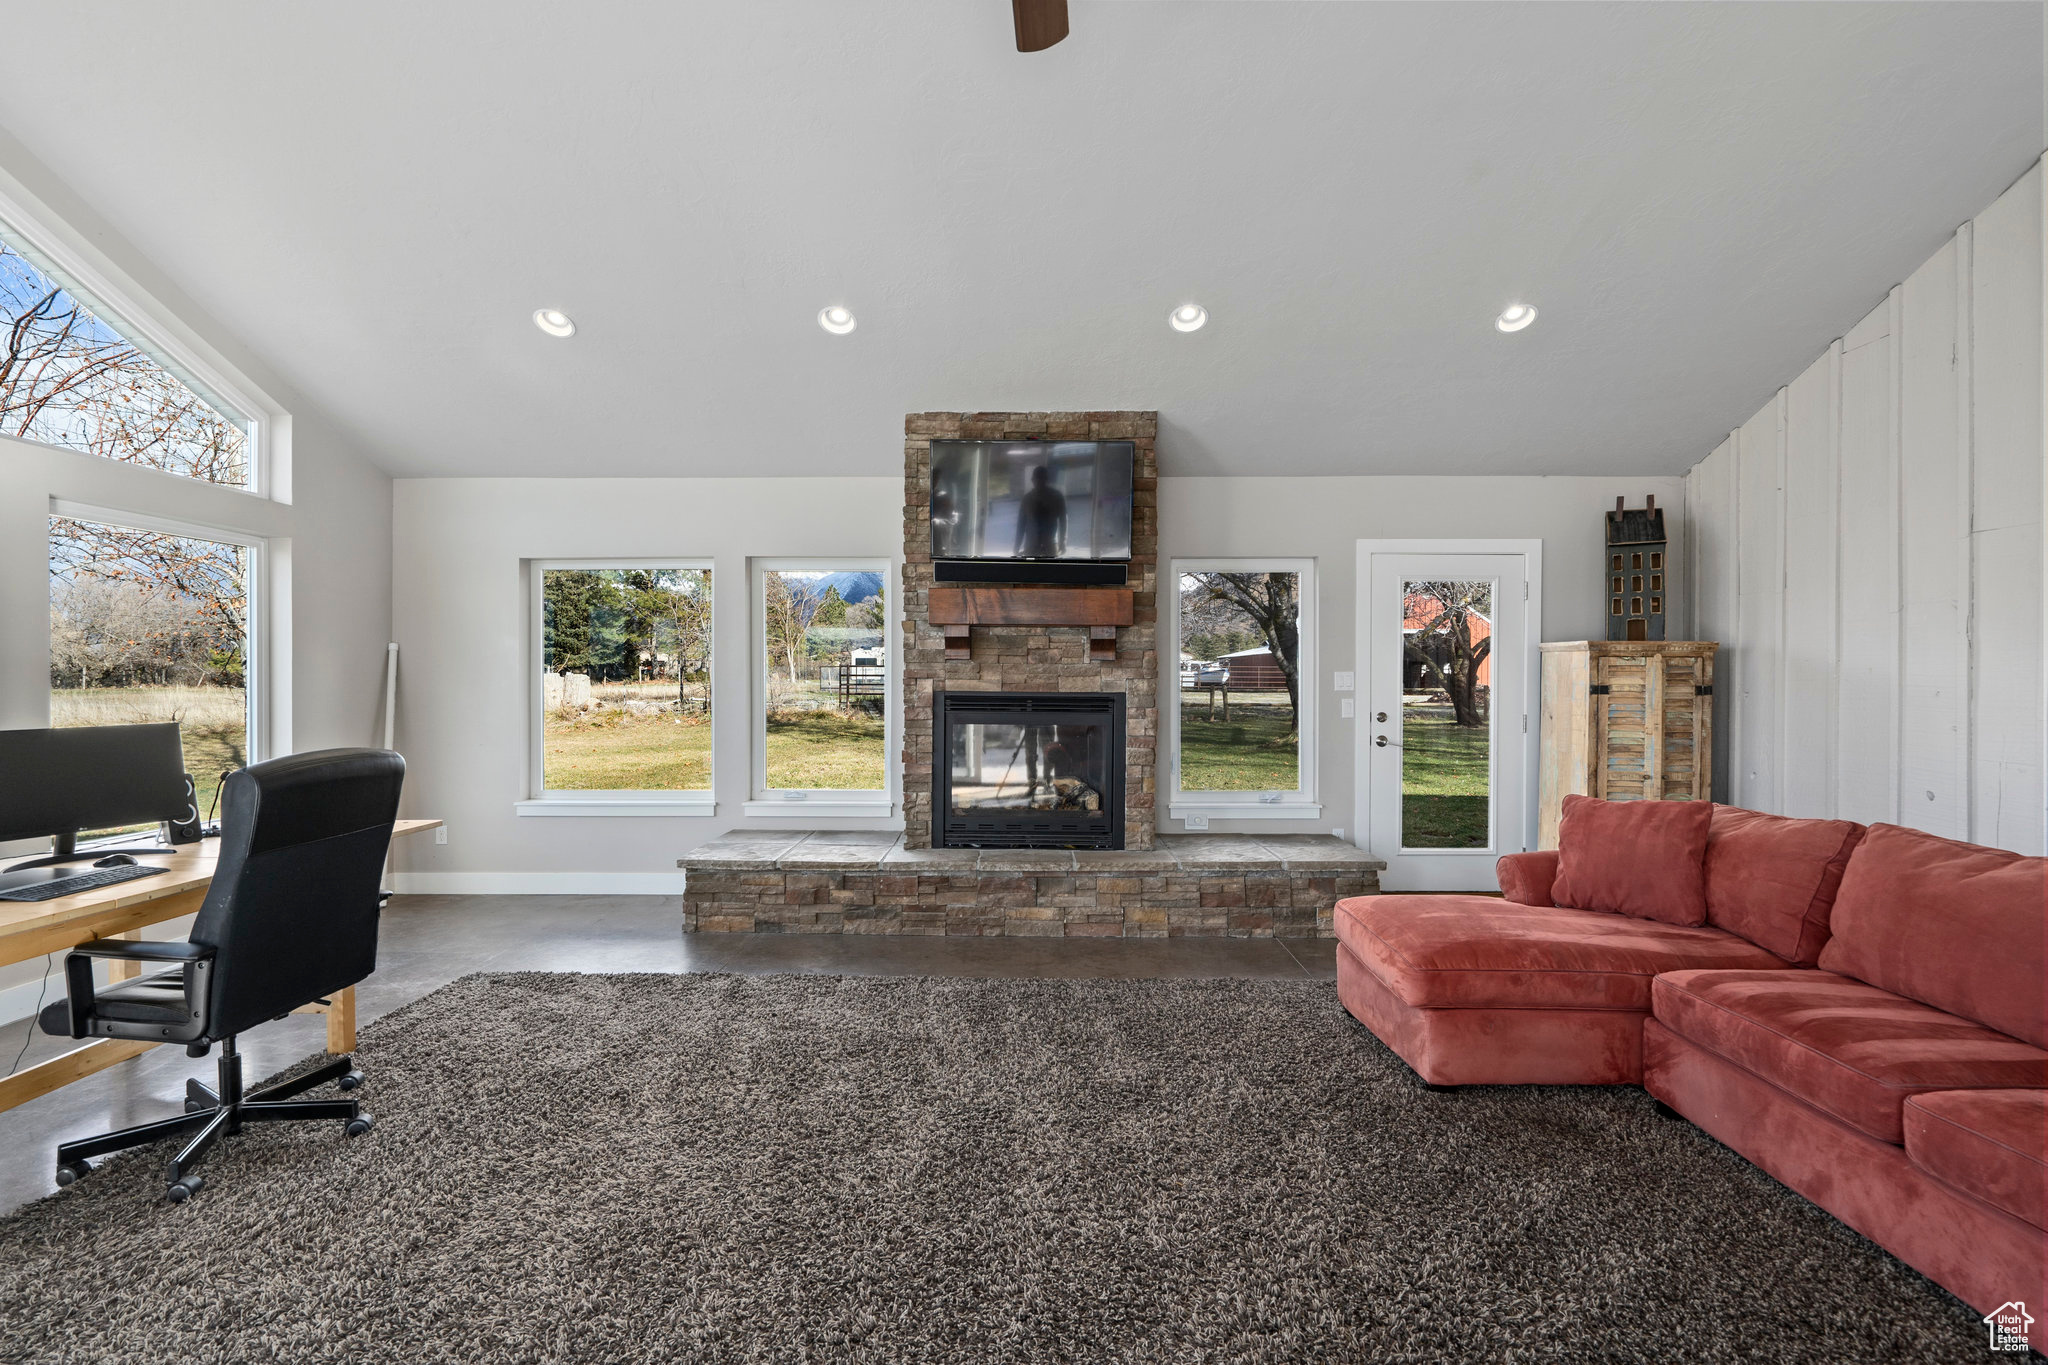 Office space with a stone fireplace, ceiling fan, and vaulted ceiling. Enjoy close to 600 square feet of entertaining or gathering space in this cozy sunroom behind the garage on the north side of the home.